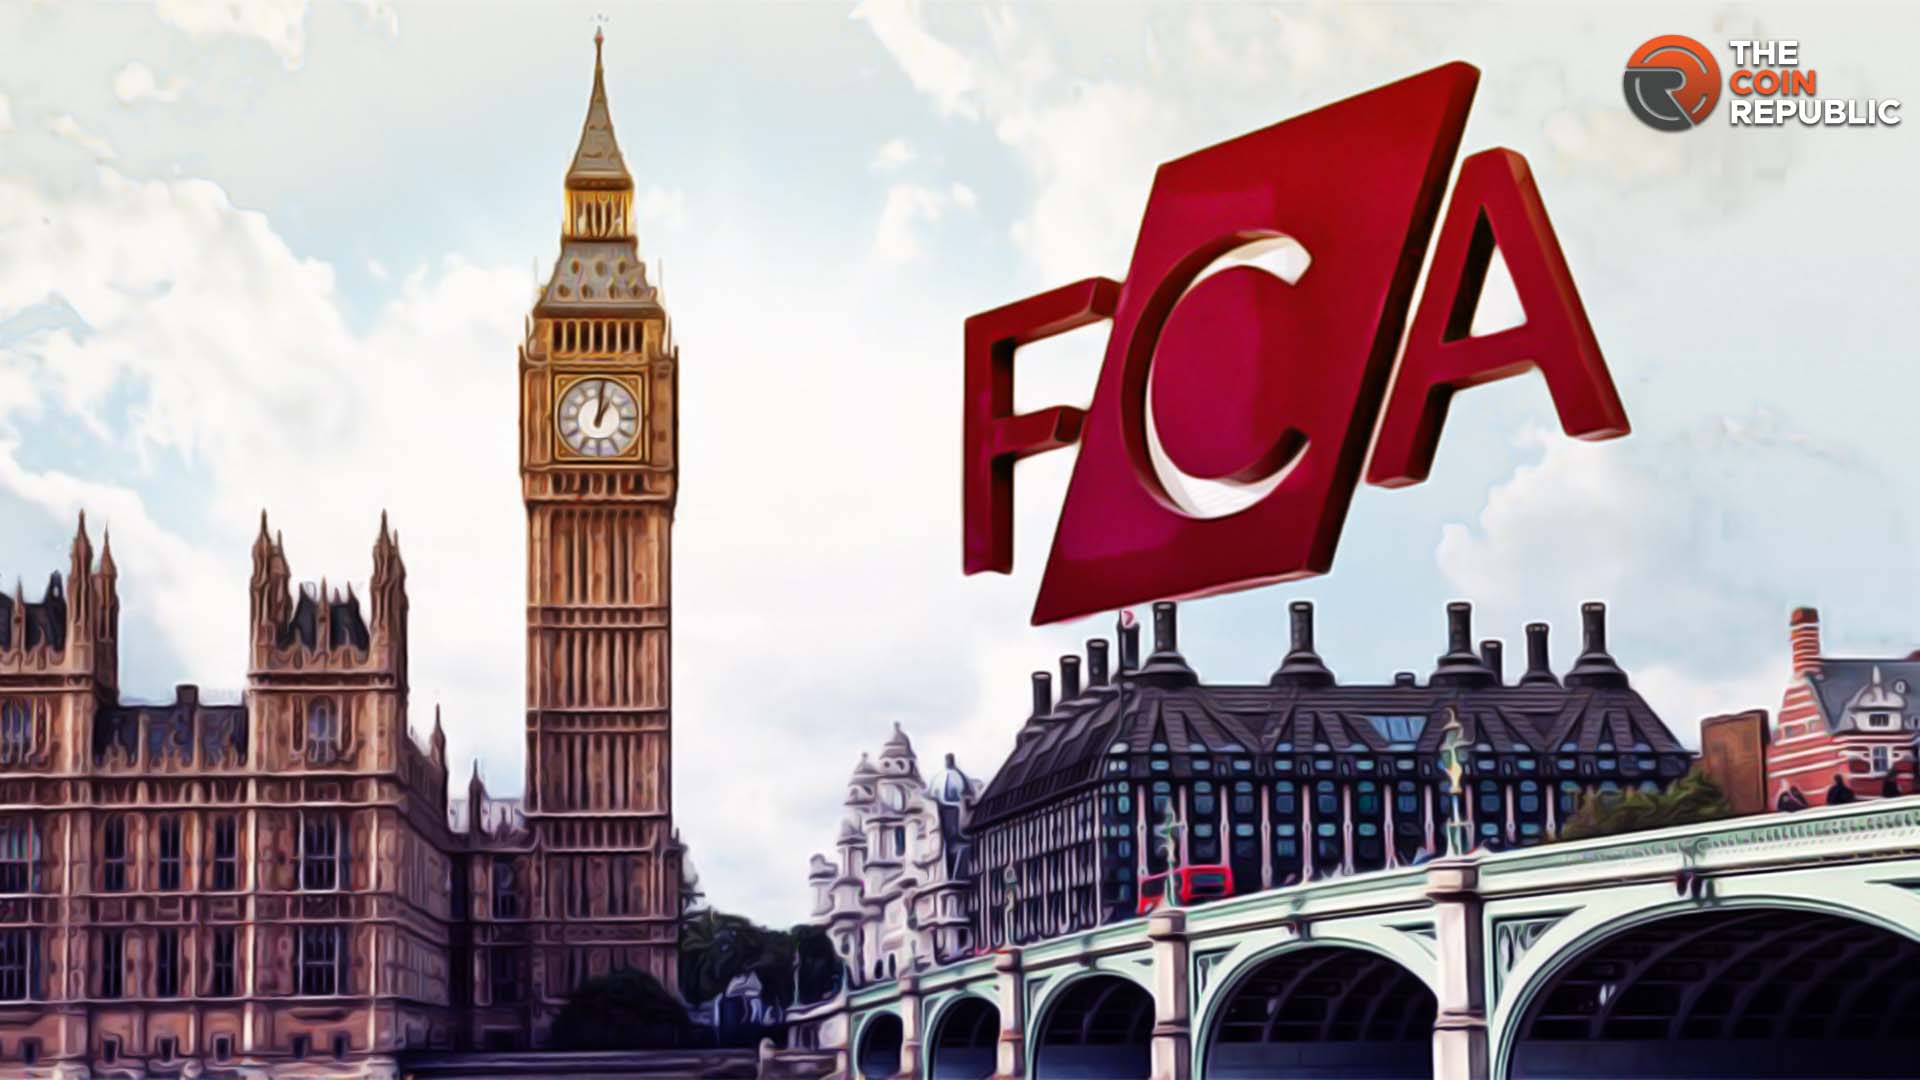 UK secures-regulation-on-crypto-fca-reports-it-a-high-risk-product